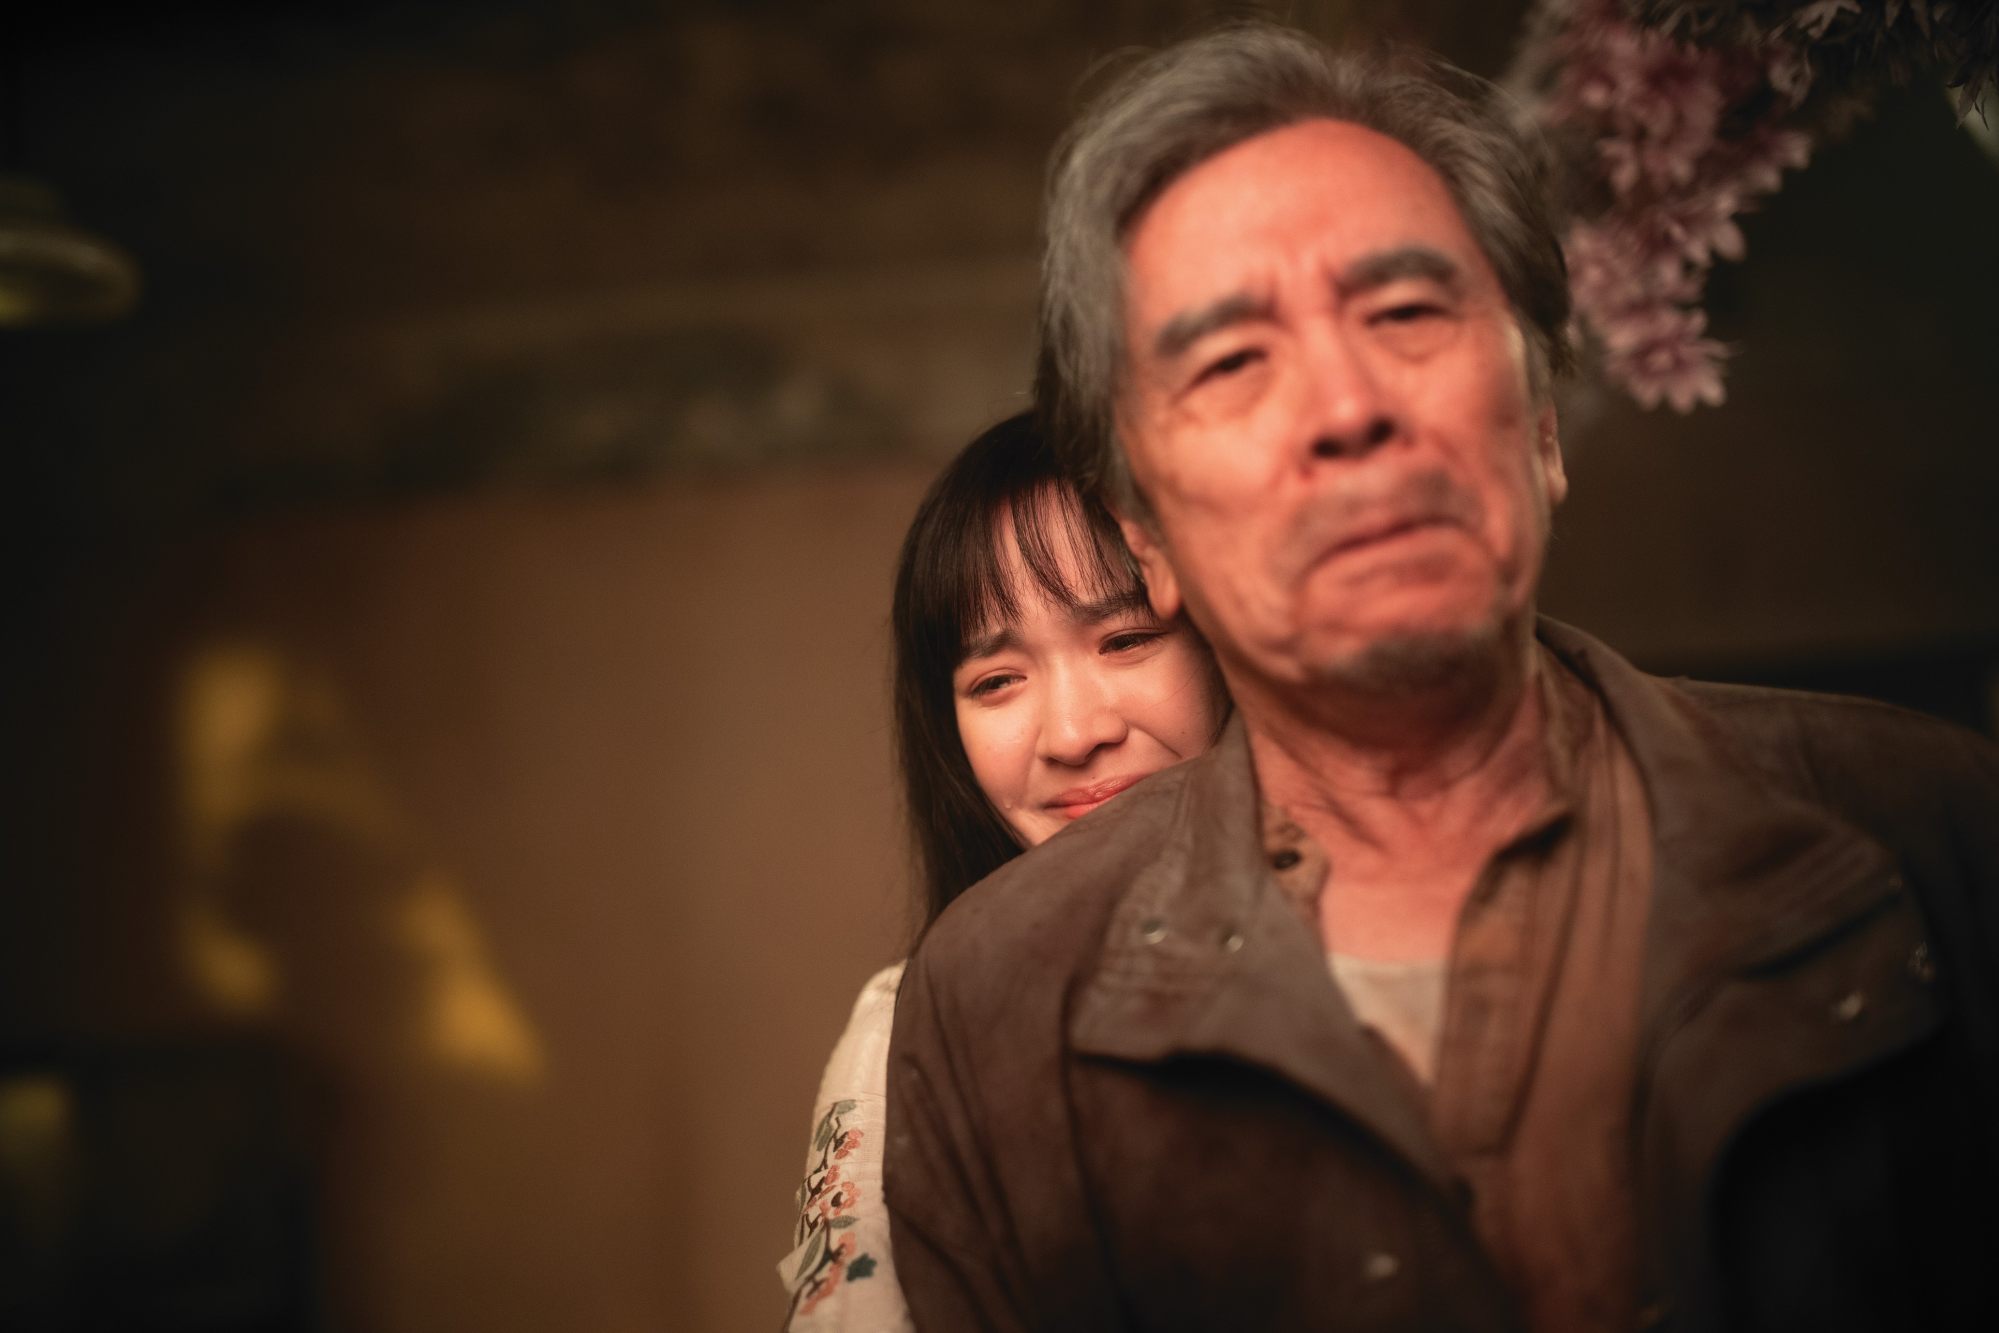 David Chiang (front) and Summer Chan in a still from 